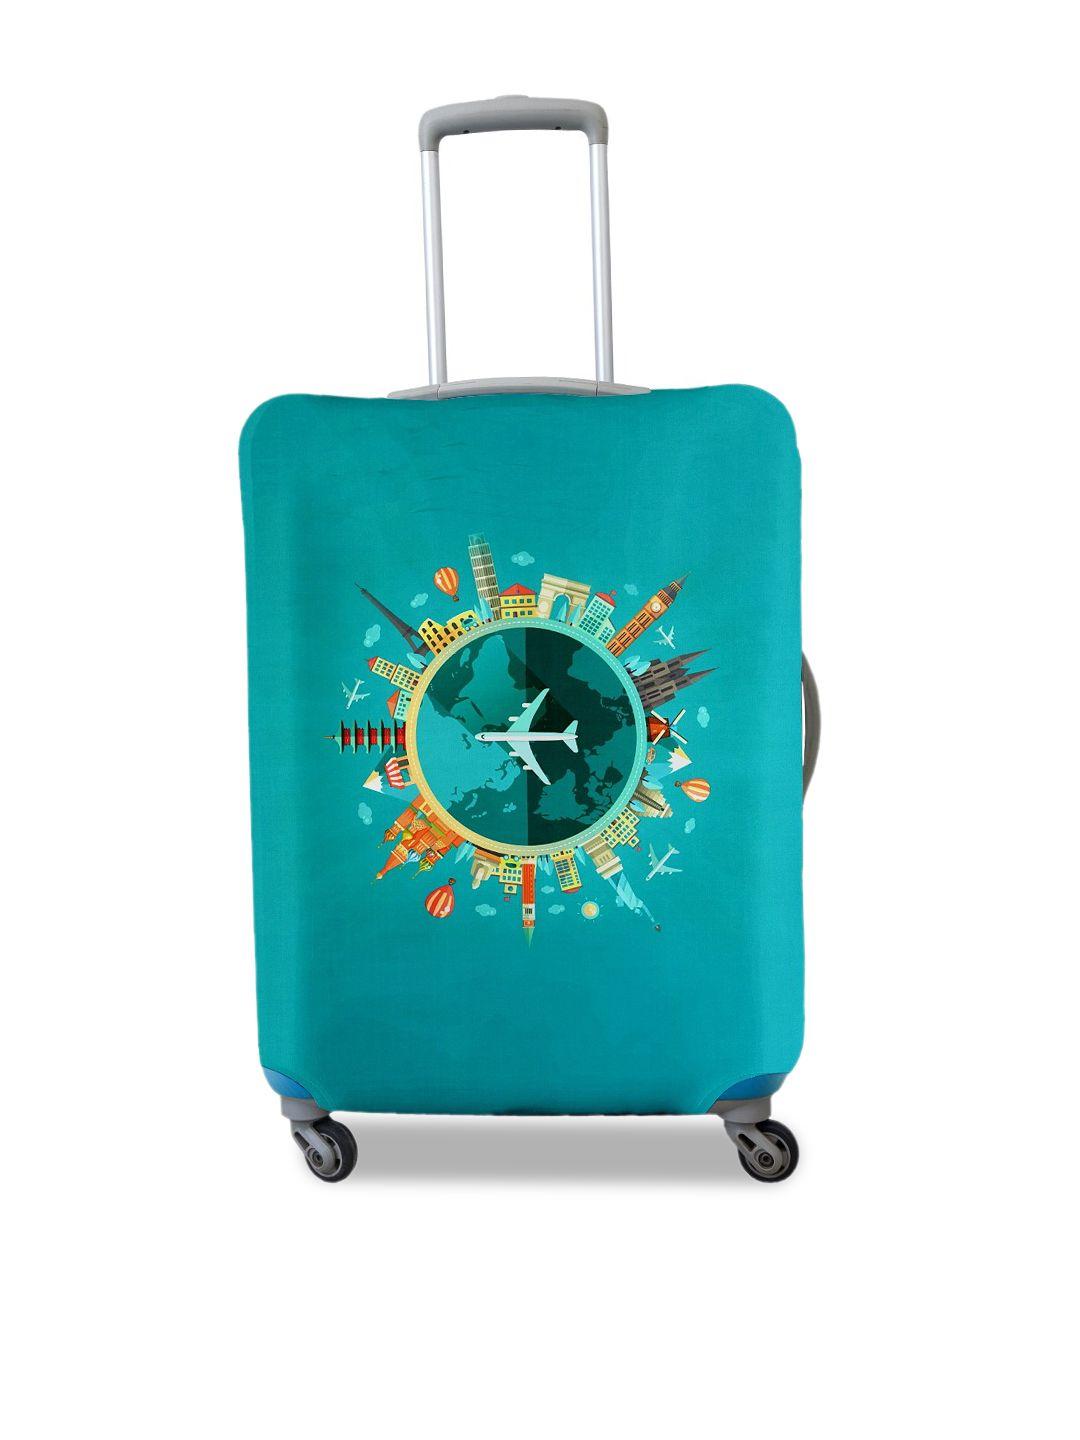 cortina turquoise printed protective large trolley bag cover